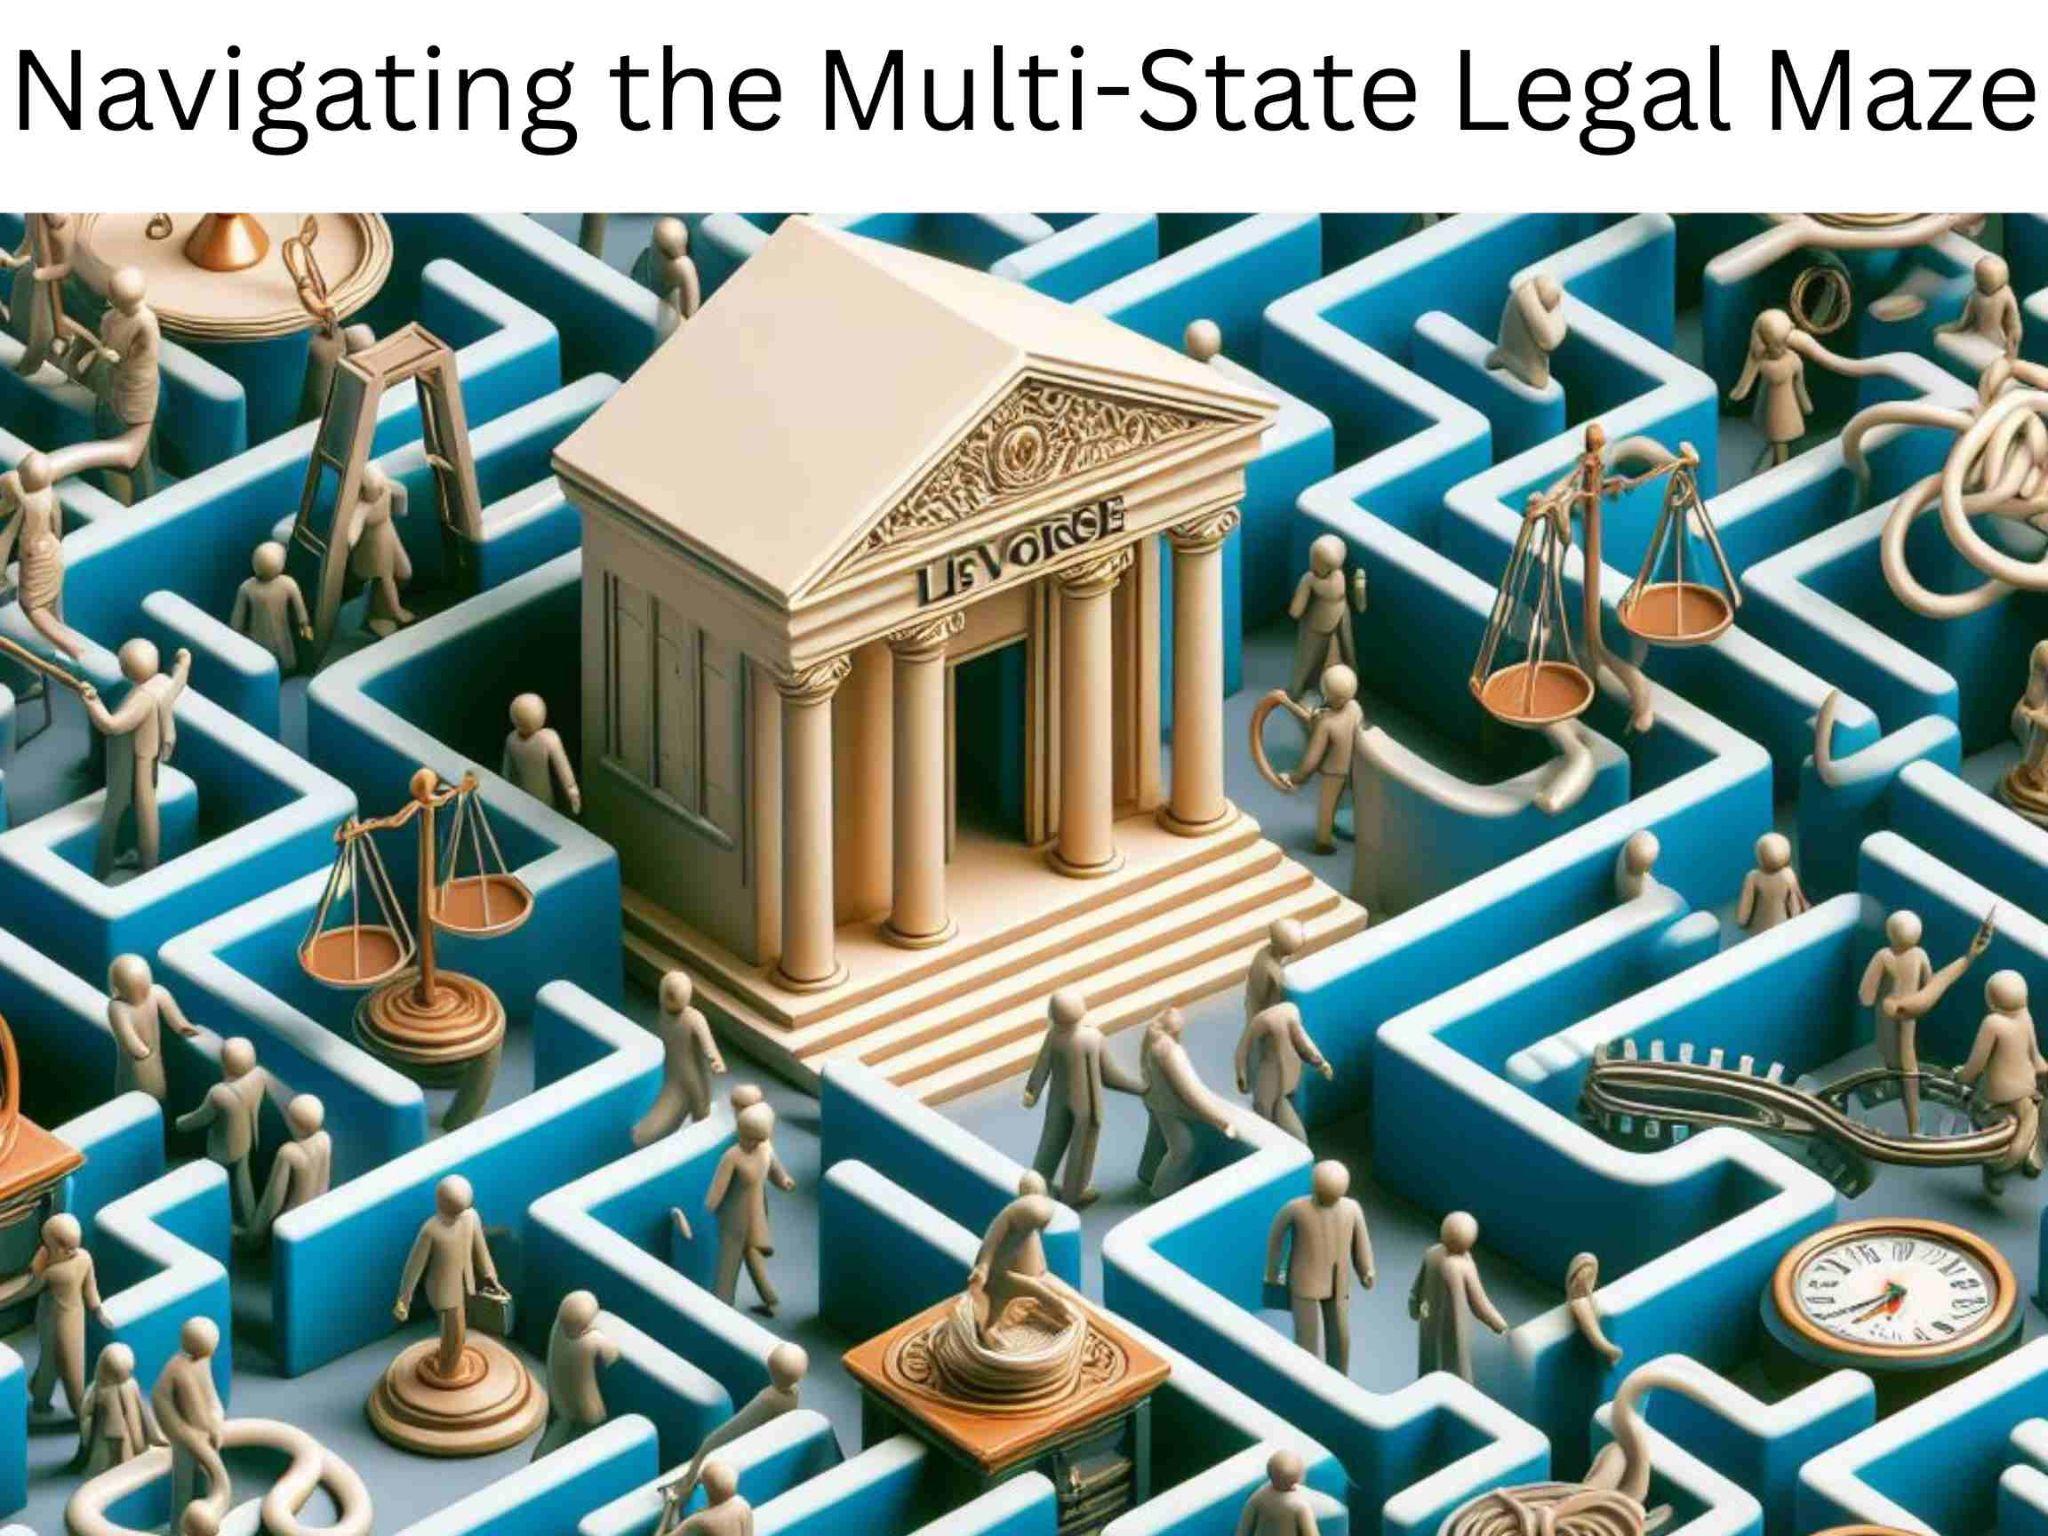 An illustration representing the complexities of multi-state legal systems, depicted as a labyrinth with legal symbols and figurines.